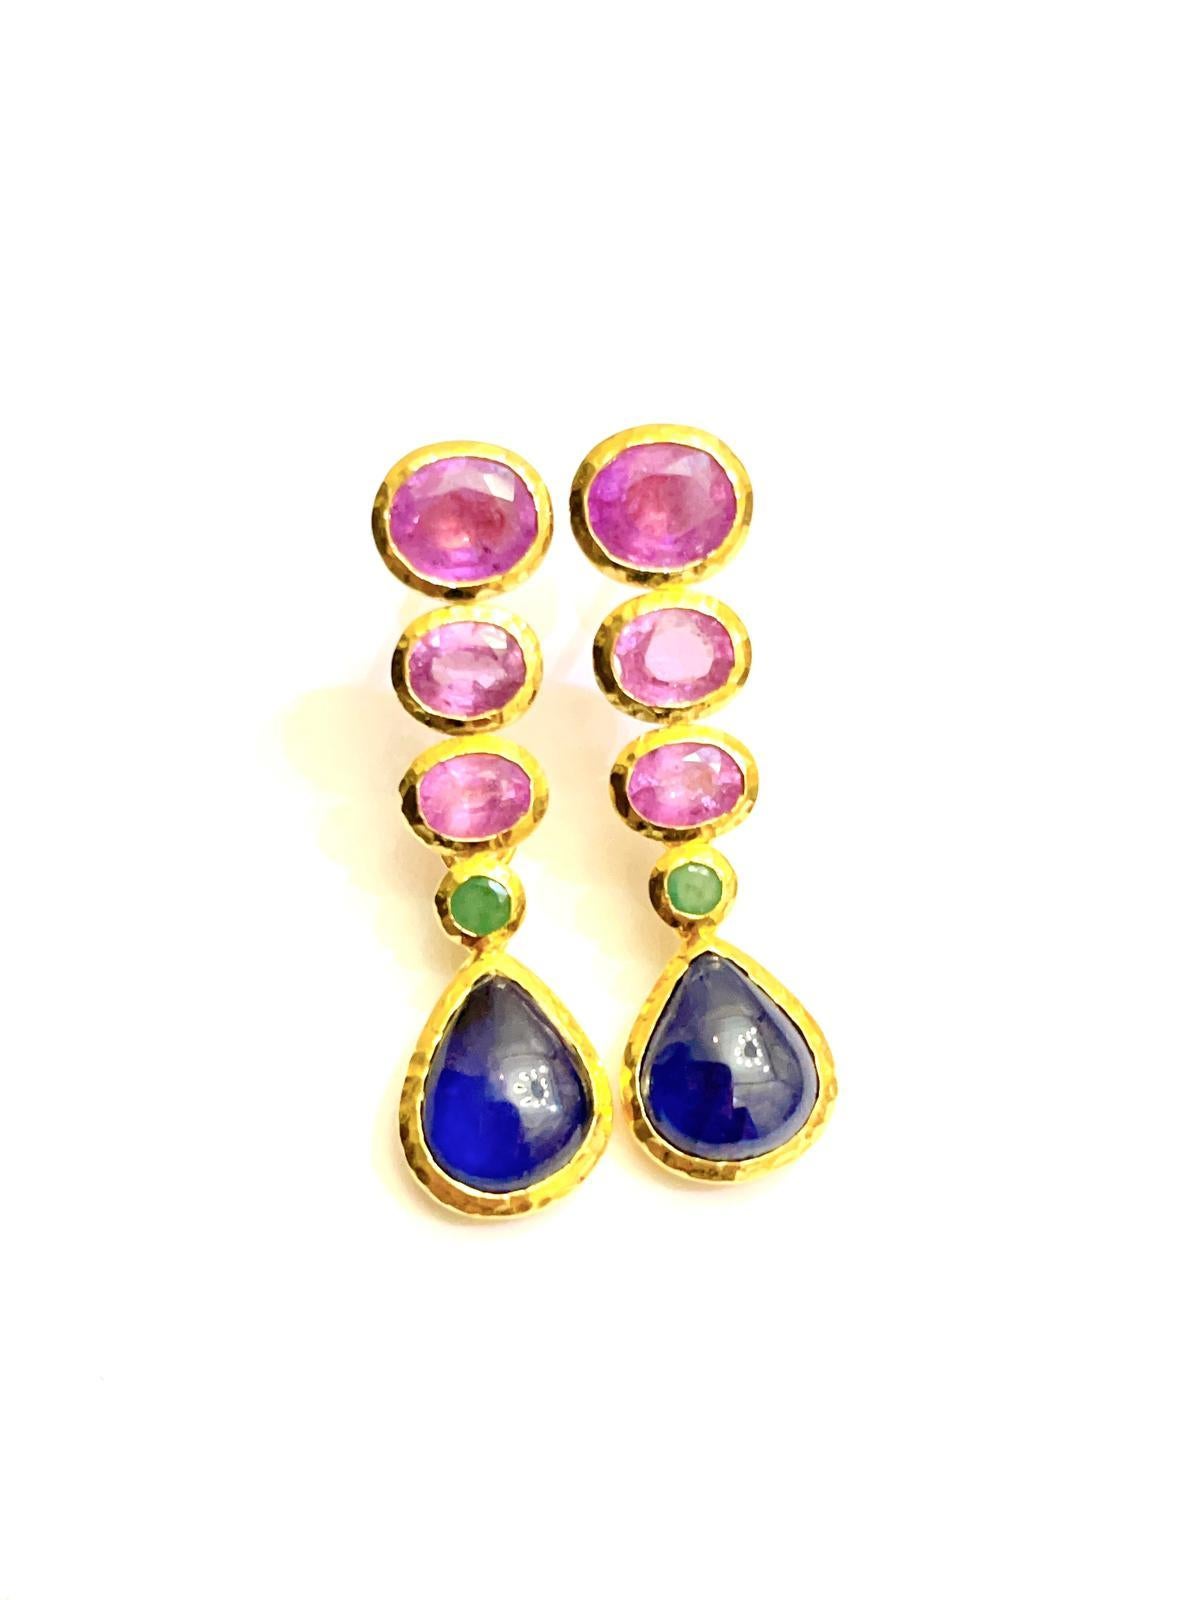 Bochic “Capri”, Ruby, Blue Sapphire & Emerald Drop Earrings set in 22 Gold & Sil In New Condition For Sale In New York, NY